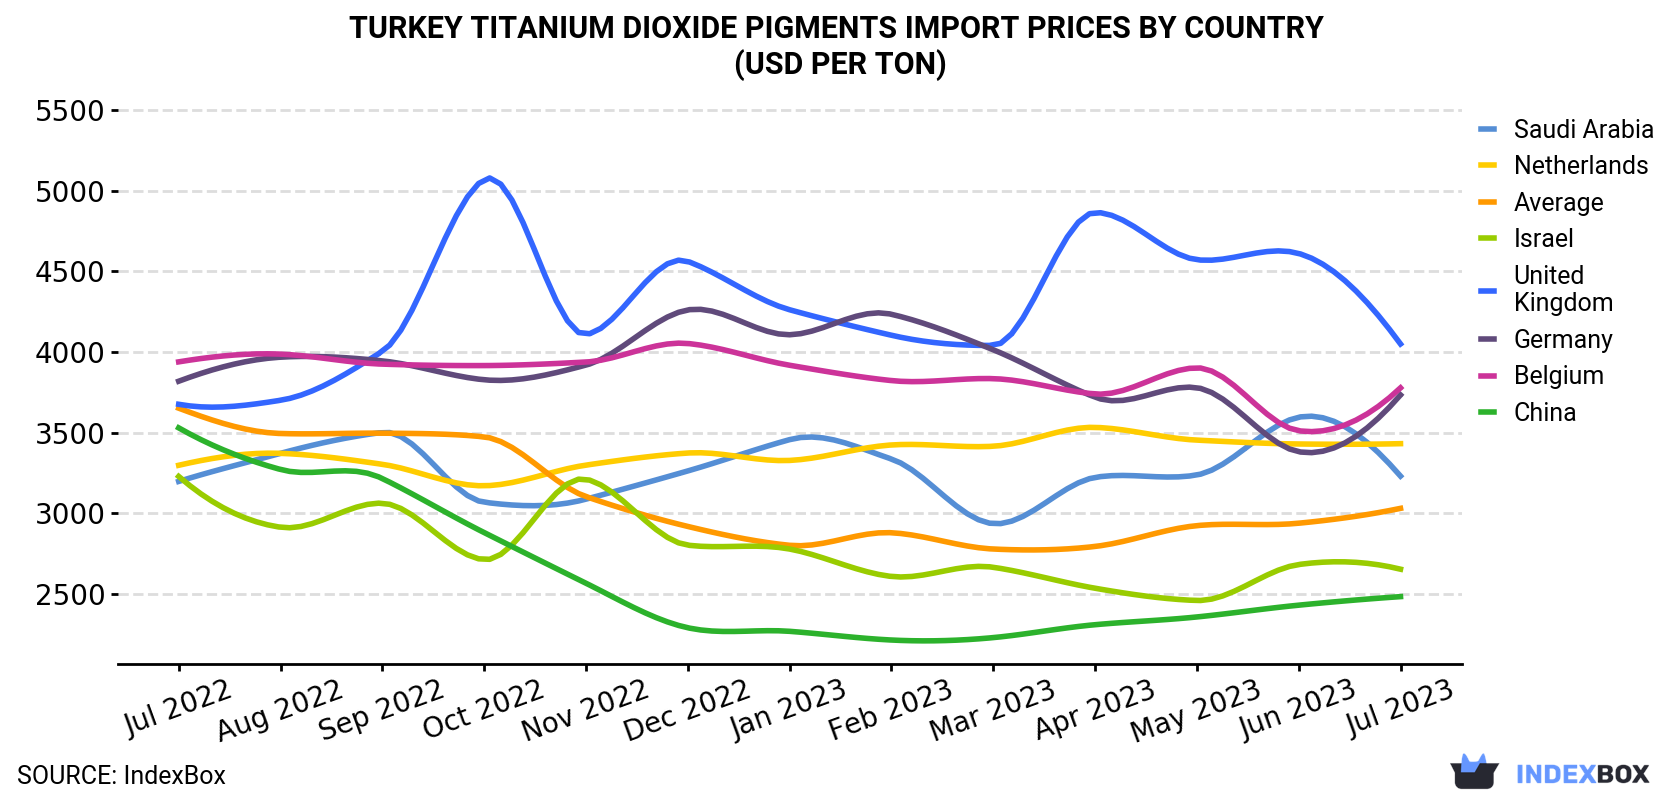 Turkey Titanium Dioxide Pigments Import Prices By Country (USD Per Ton)